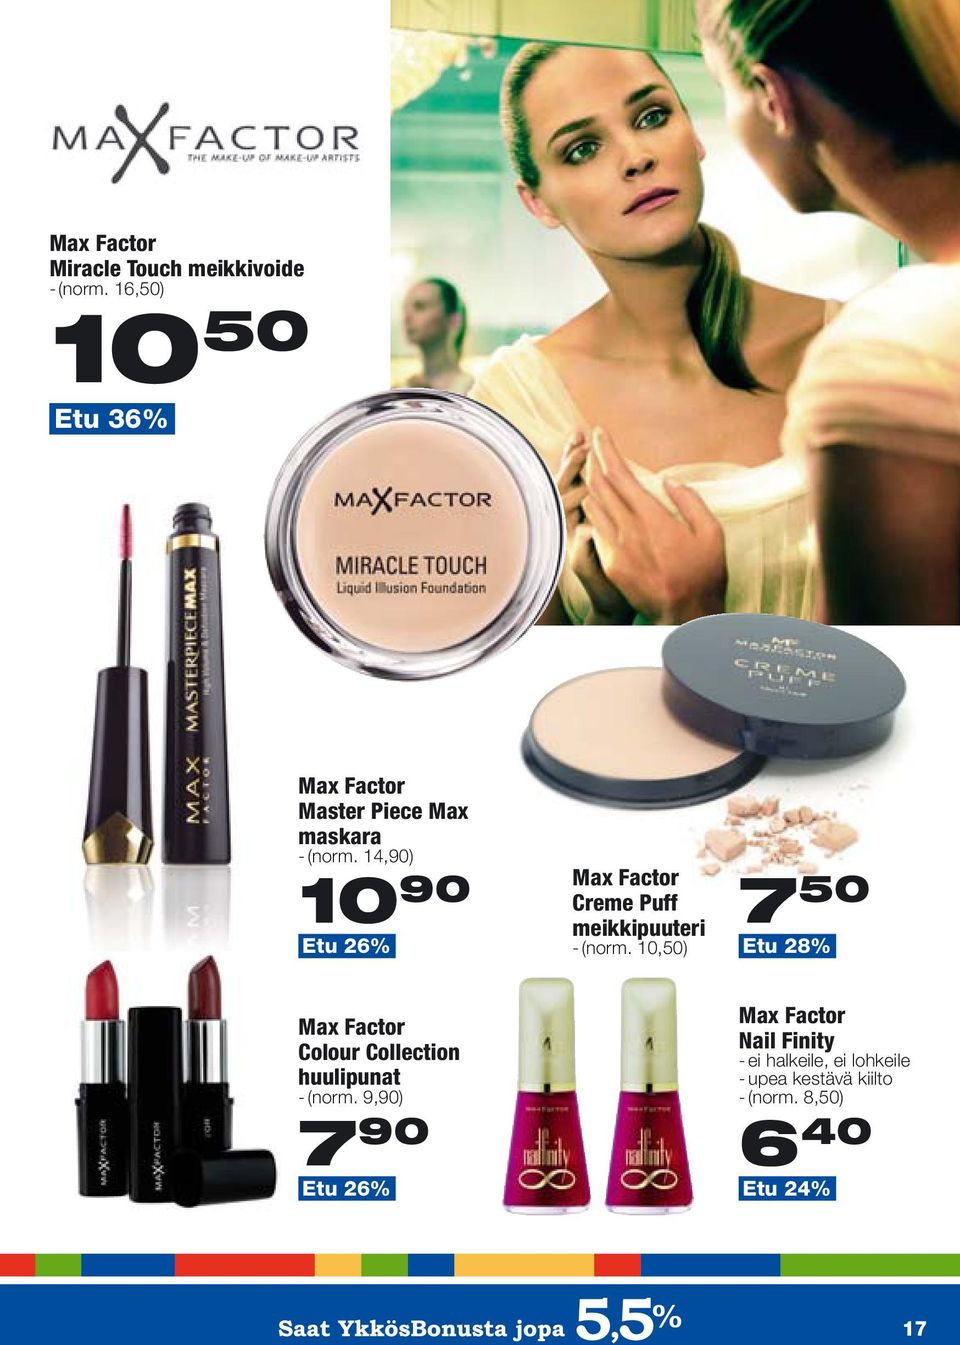 14,90) 10 90 Etu 26% Max Factor Colour Collection huulipunat - (norm.